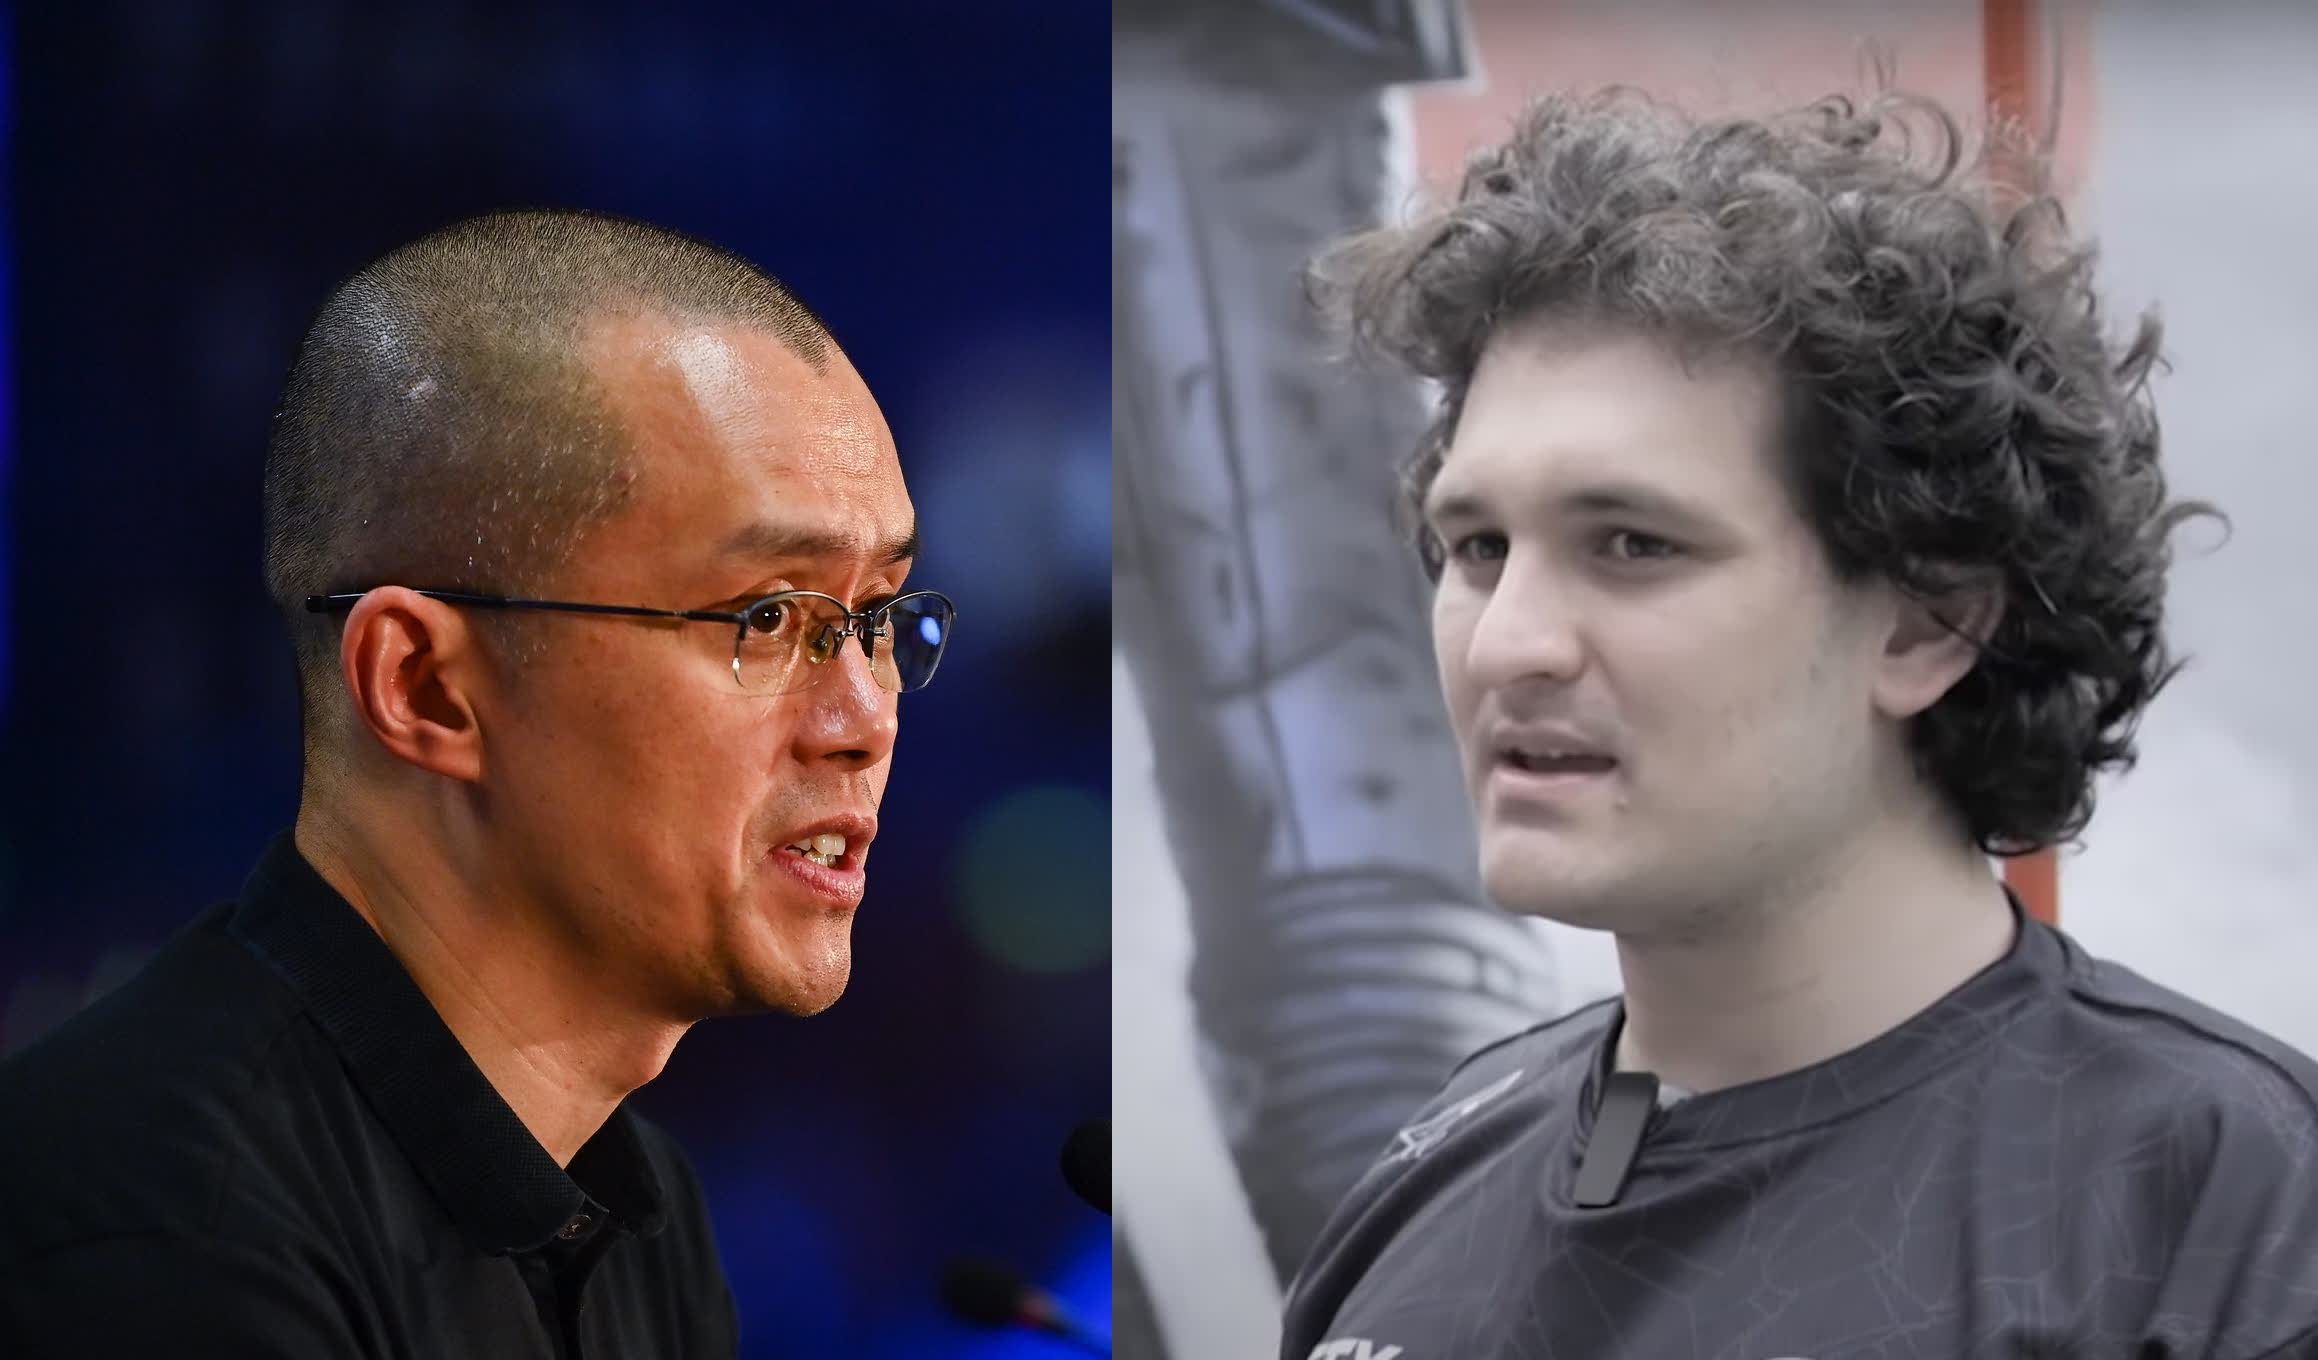 Binance CEO reportedly accused Sam Bankman-Fried of trying to depeg stablecoin Tether